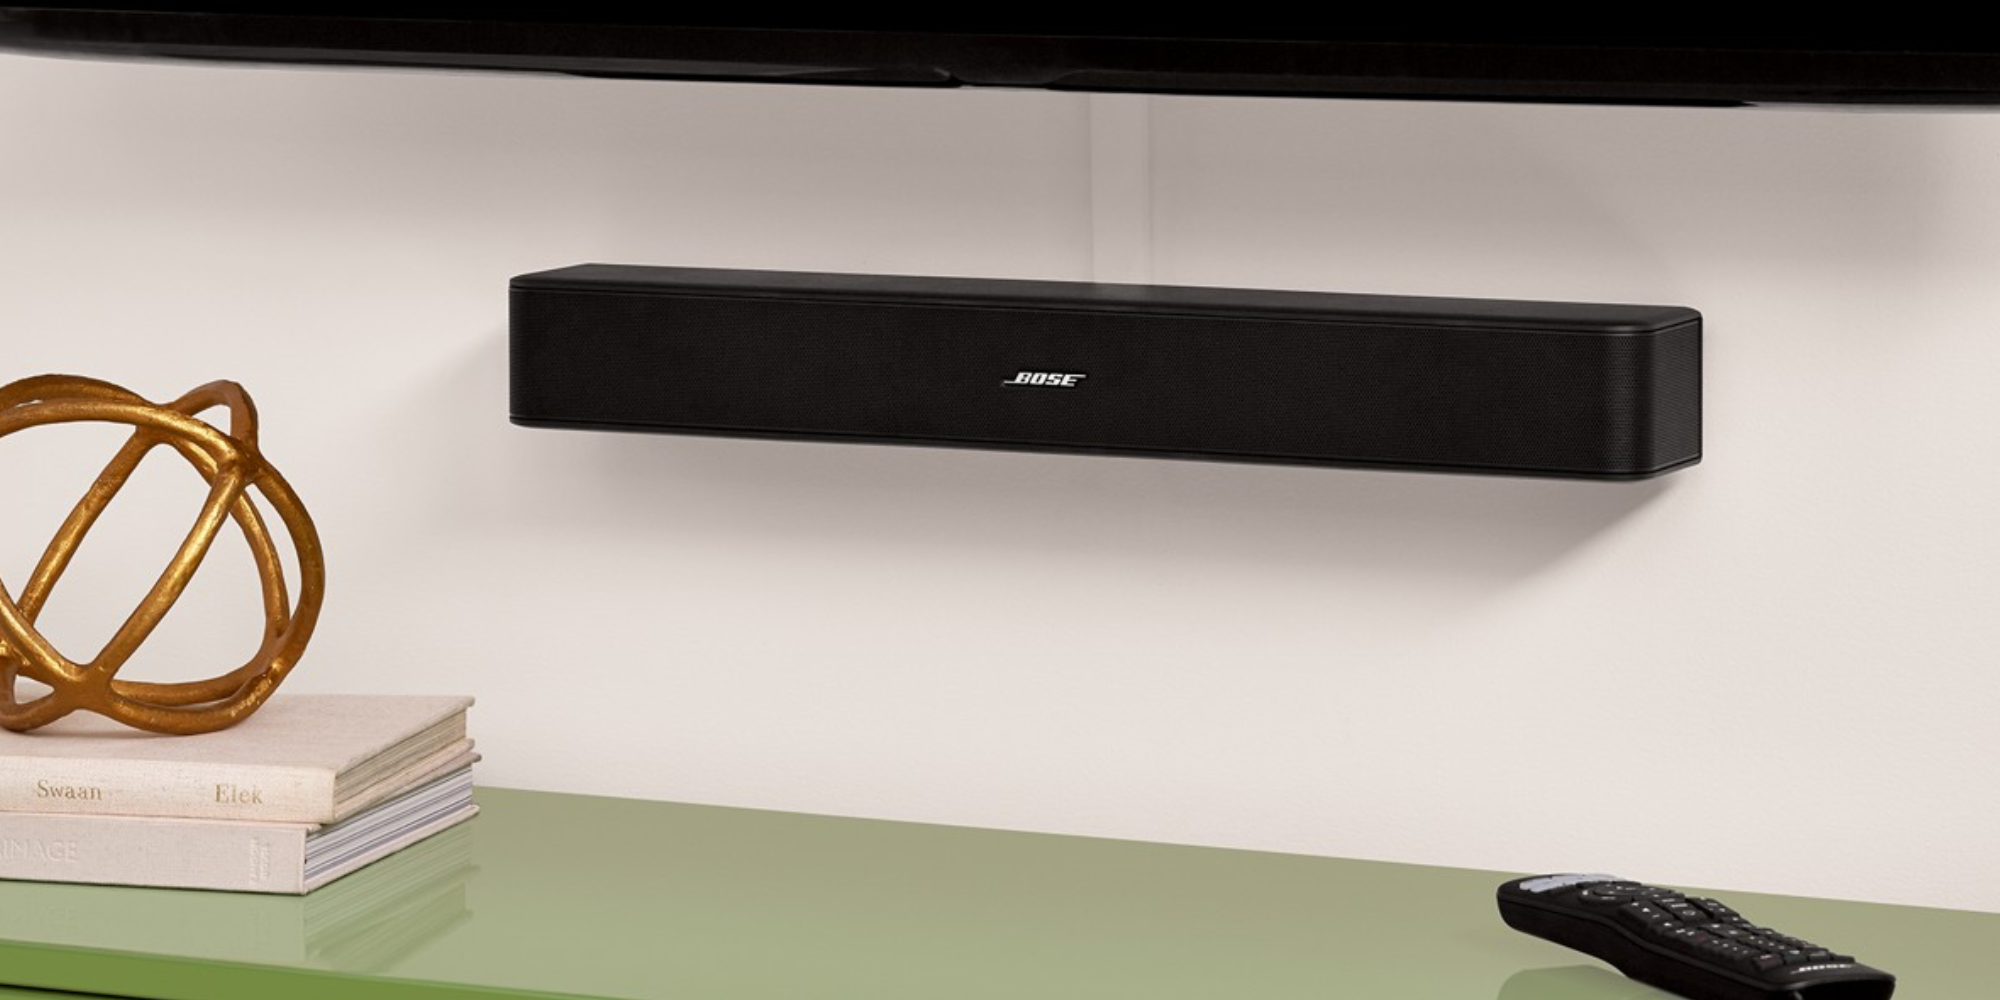 Bose's Solo 5 TV Sound System gives your HDTV the audio boost it